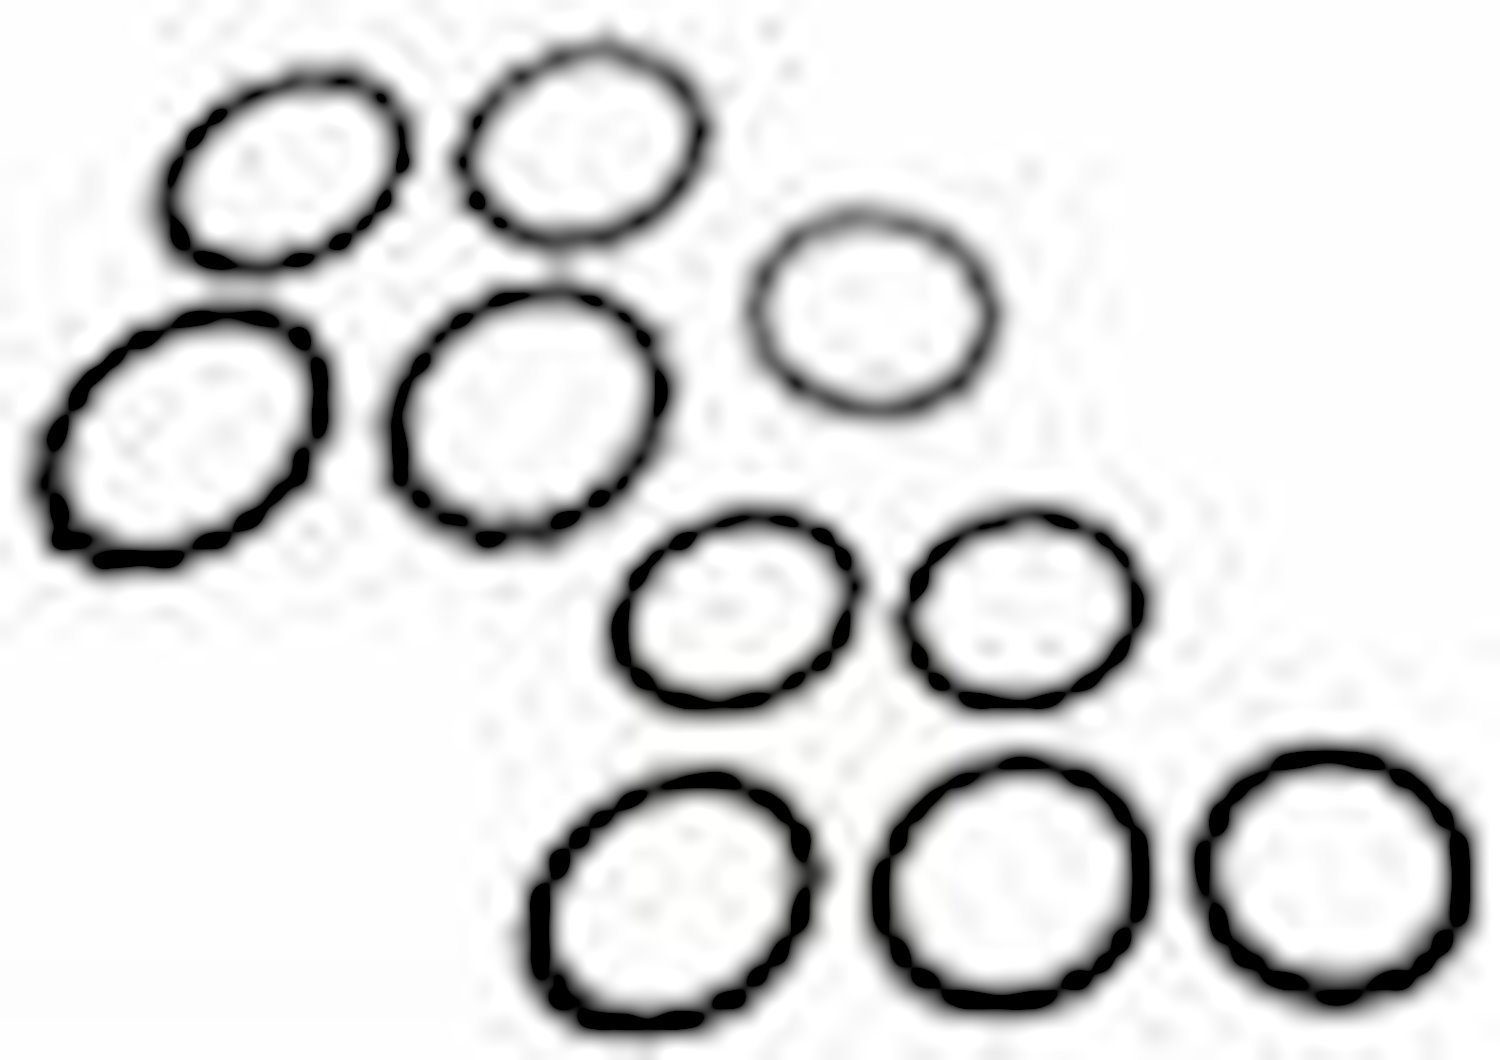 405640 Clutch Packs, Steels: (5) .078", Frictions: (5) .082" - OEM Qty, For T400